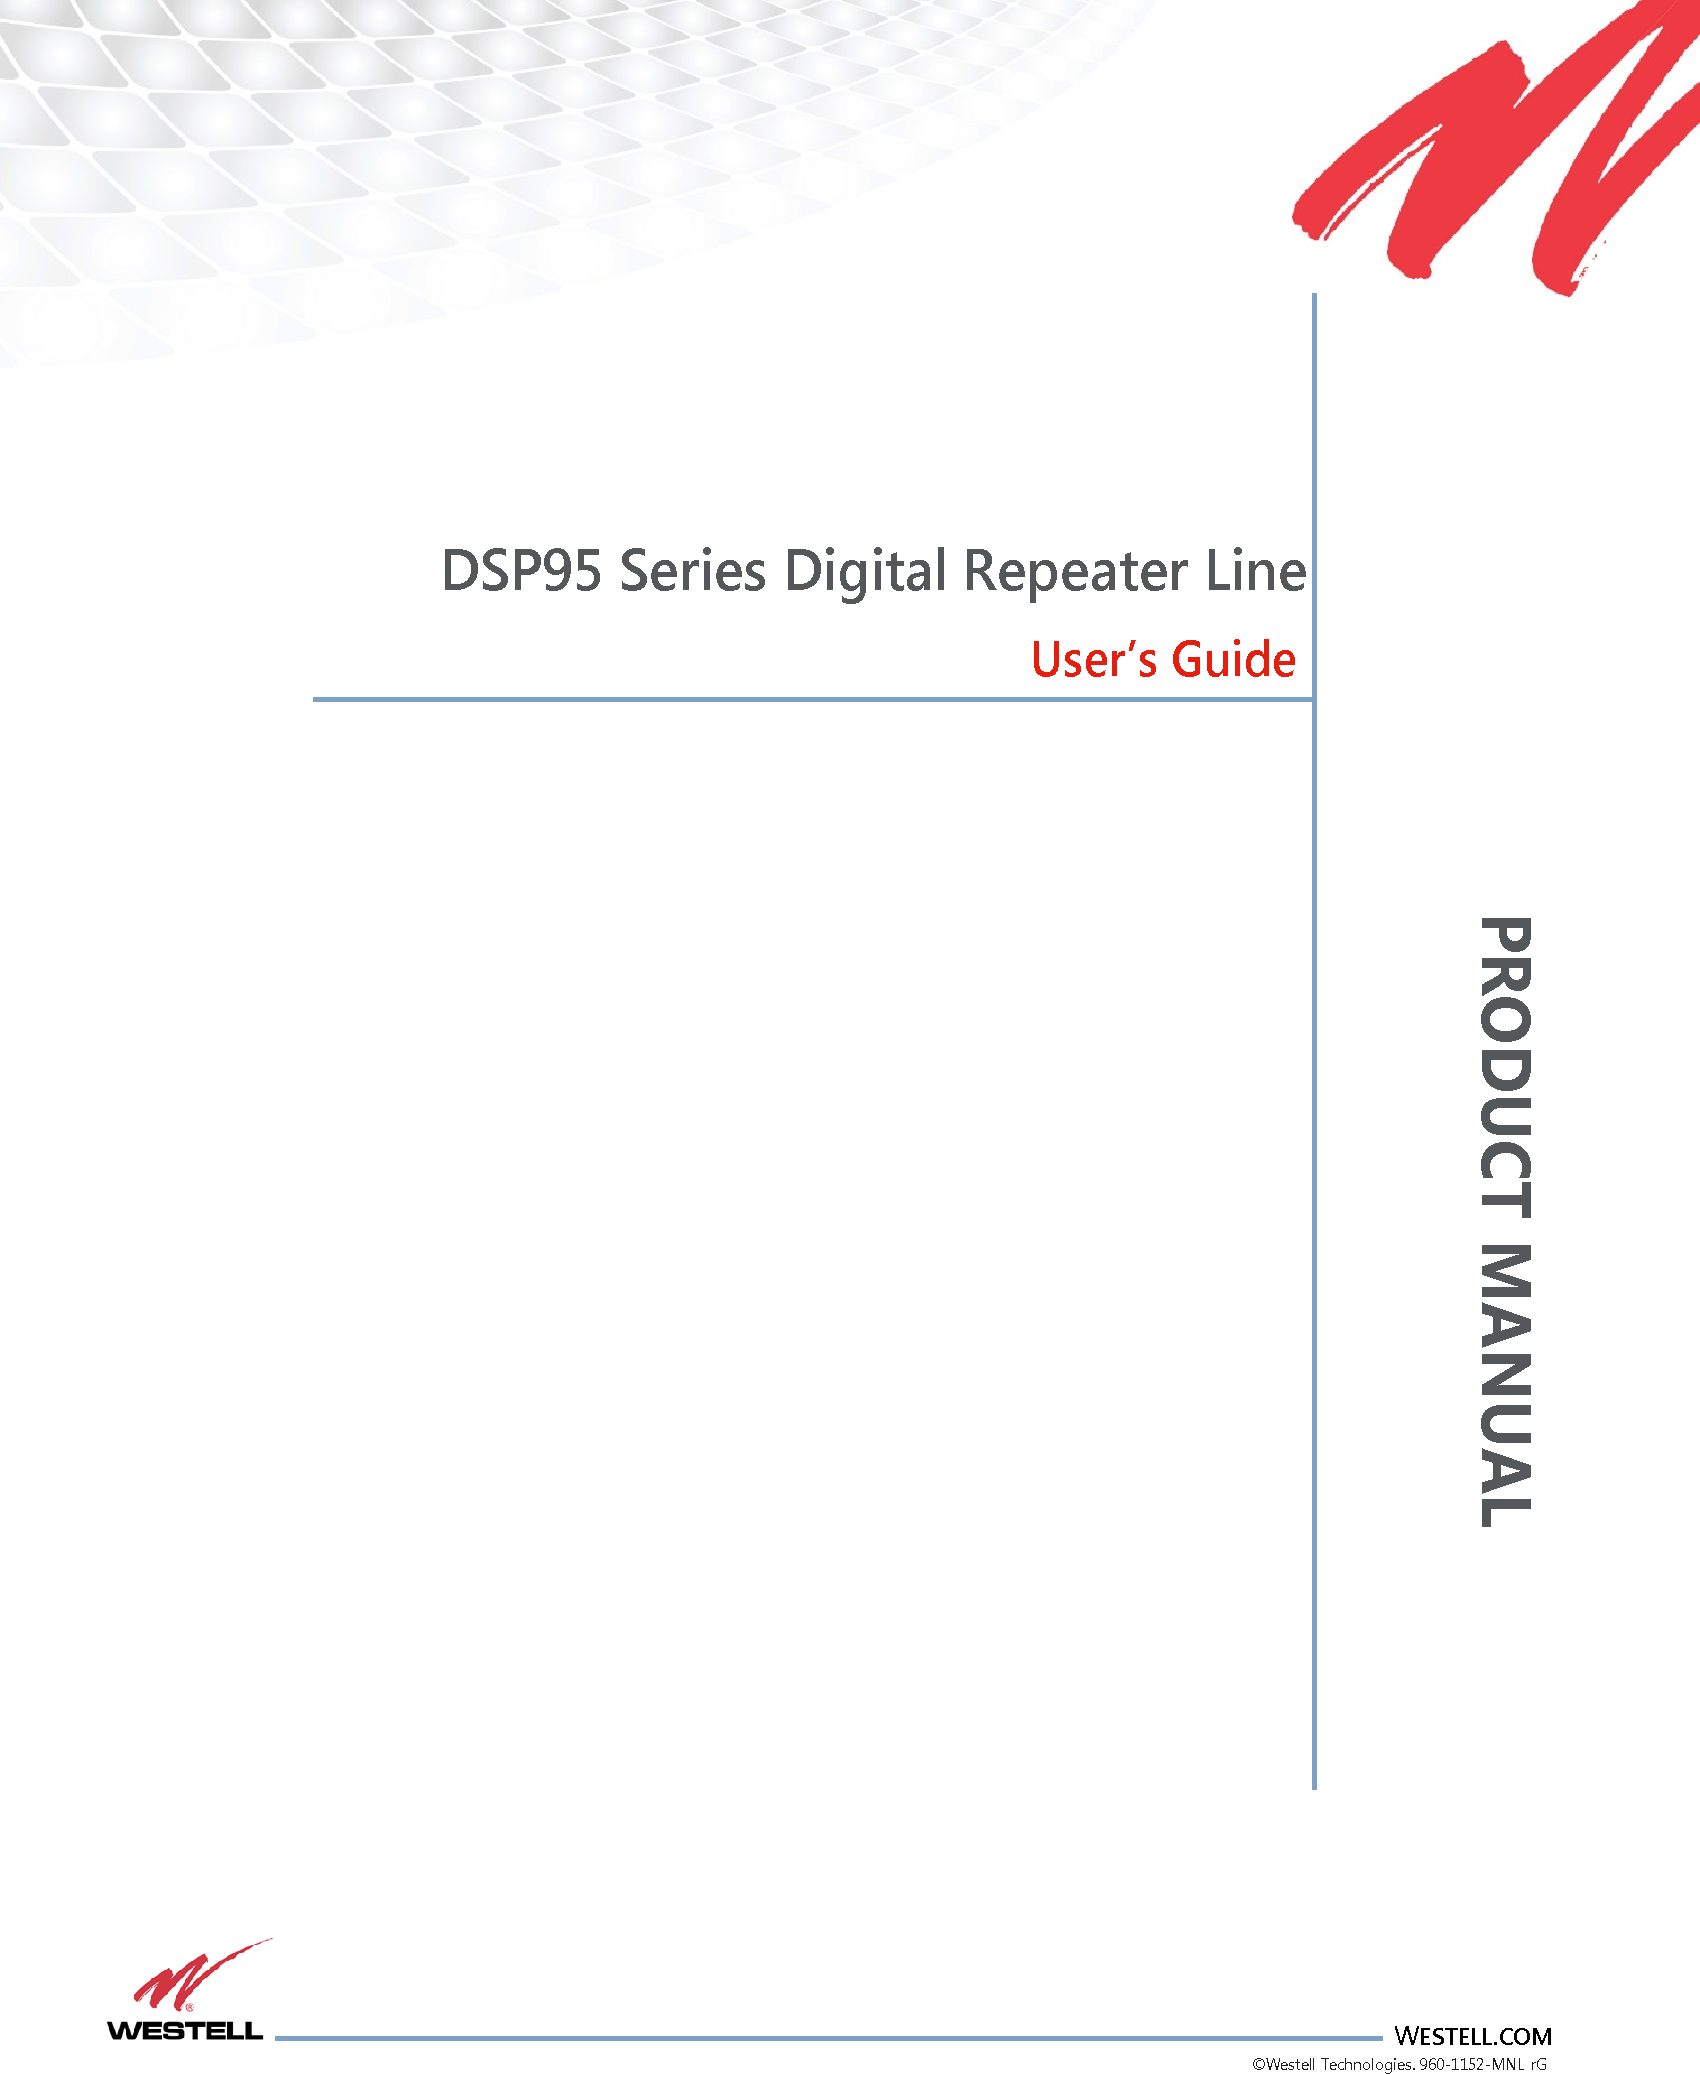 PRODUCT MANUAL                       WESTELL.COM ©Westell Technologies. 960-1152-MNL rG         DSP95 Series Digital Repeater Line        User’s Guide                     